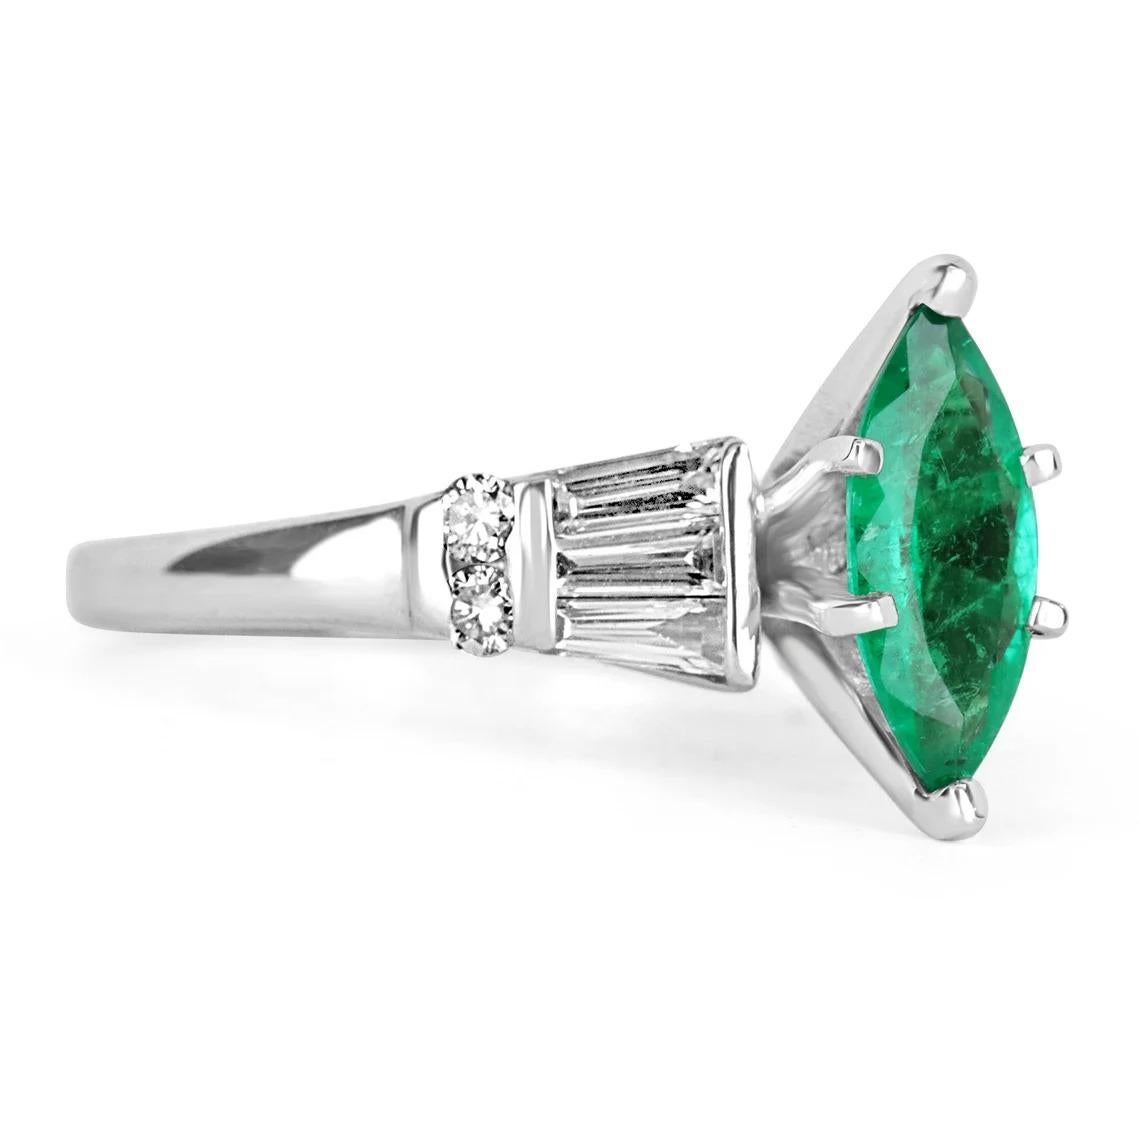 Displayed is a stunning emerald marquise and diamond ring. The center gemstone is an emerald marquise handset in a six-prong setting that allows for a full view of the emerald. Tapered baguette and brilliant round diamonds are tension set on the